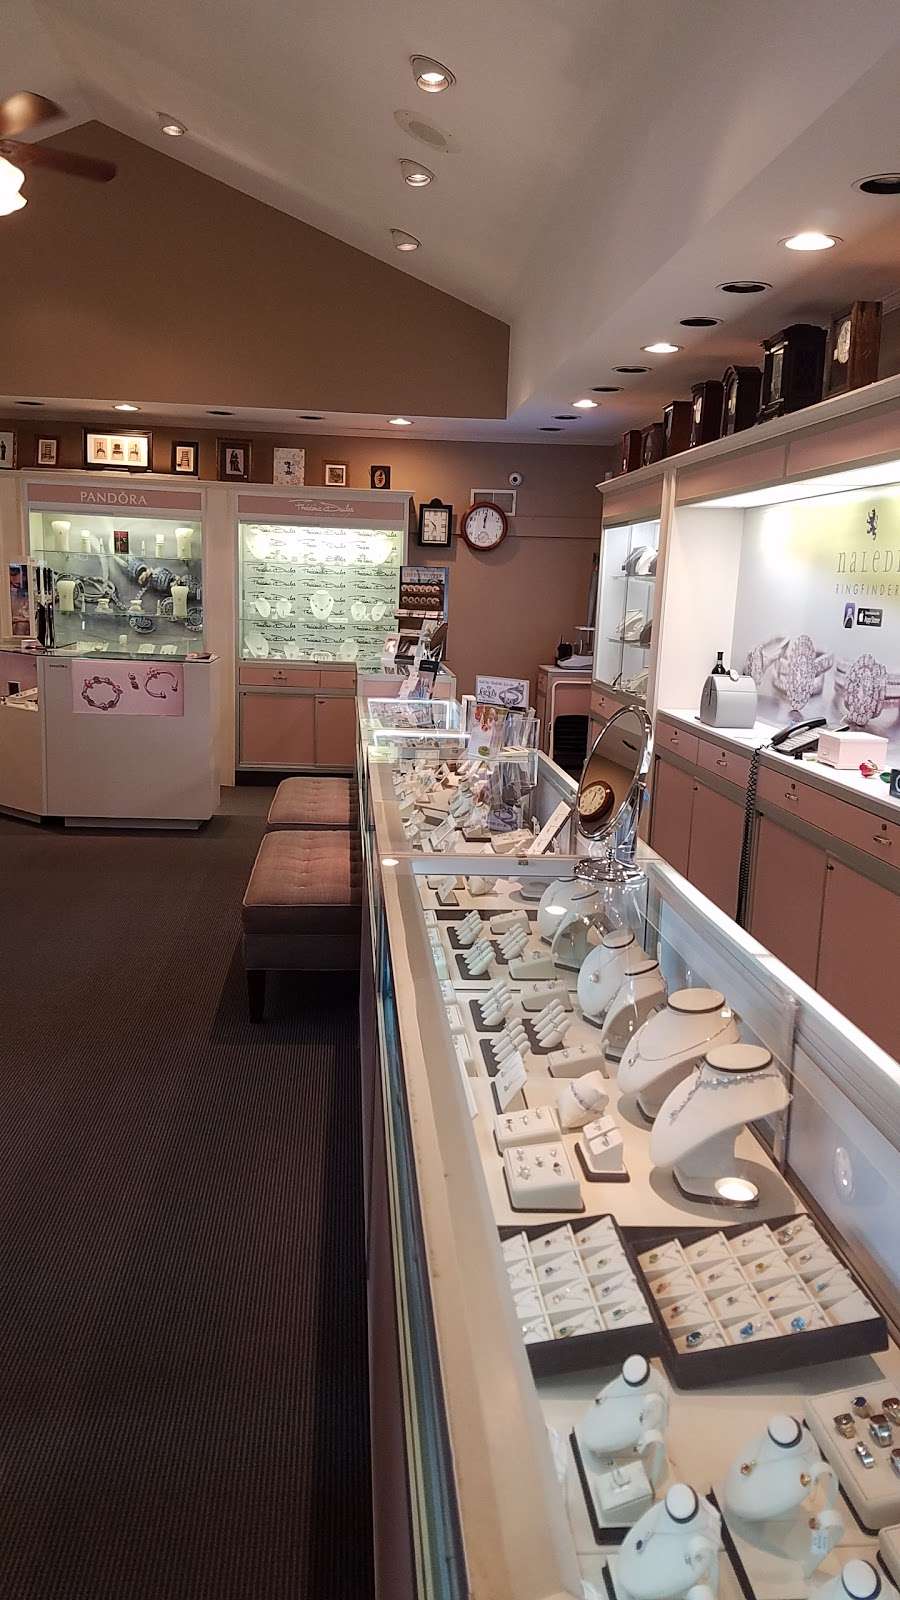 Leitzels Jewelry | 607 E Lincoln Ave, Myerstown, PA 17067, USA | Phone: (717) 866-4274